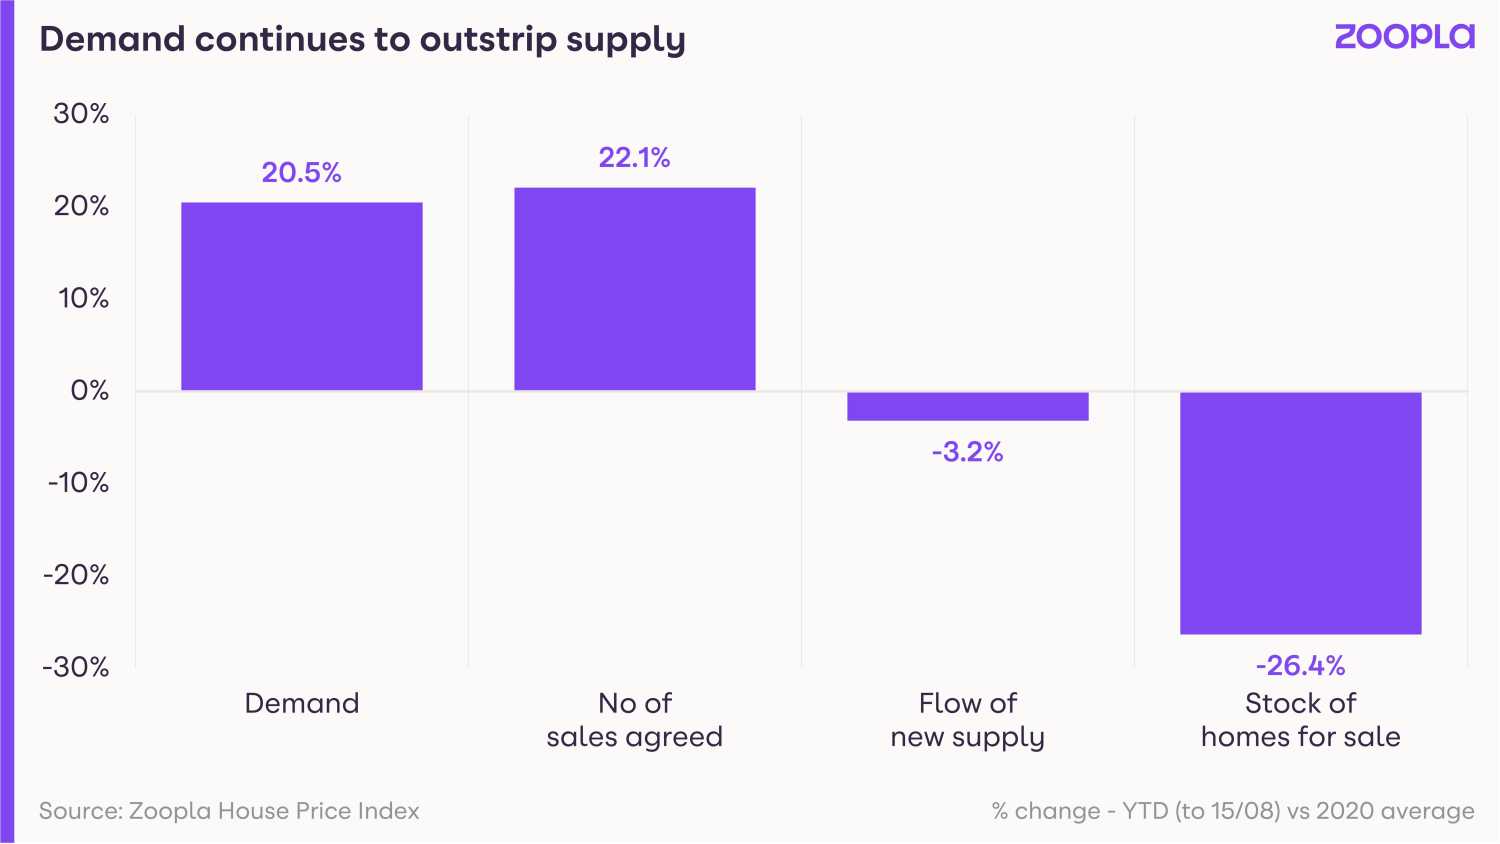 Demand continues to outstrip supply